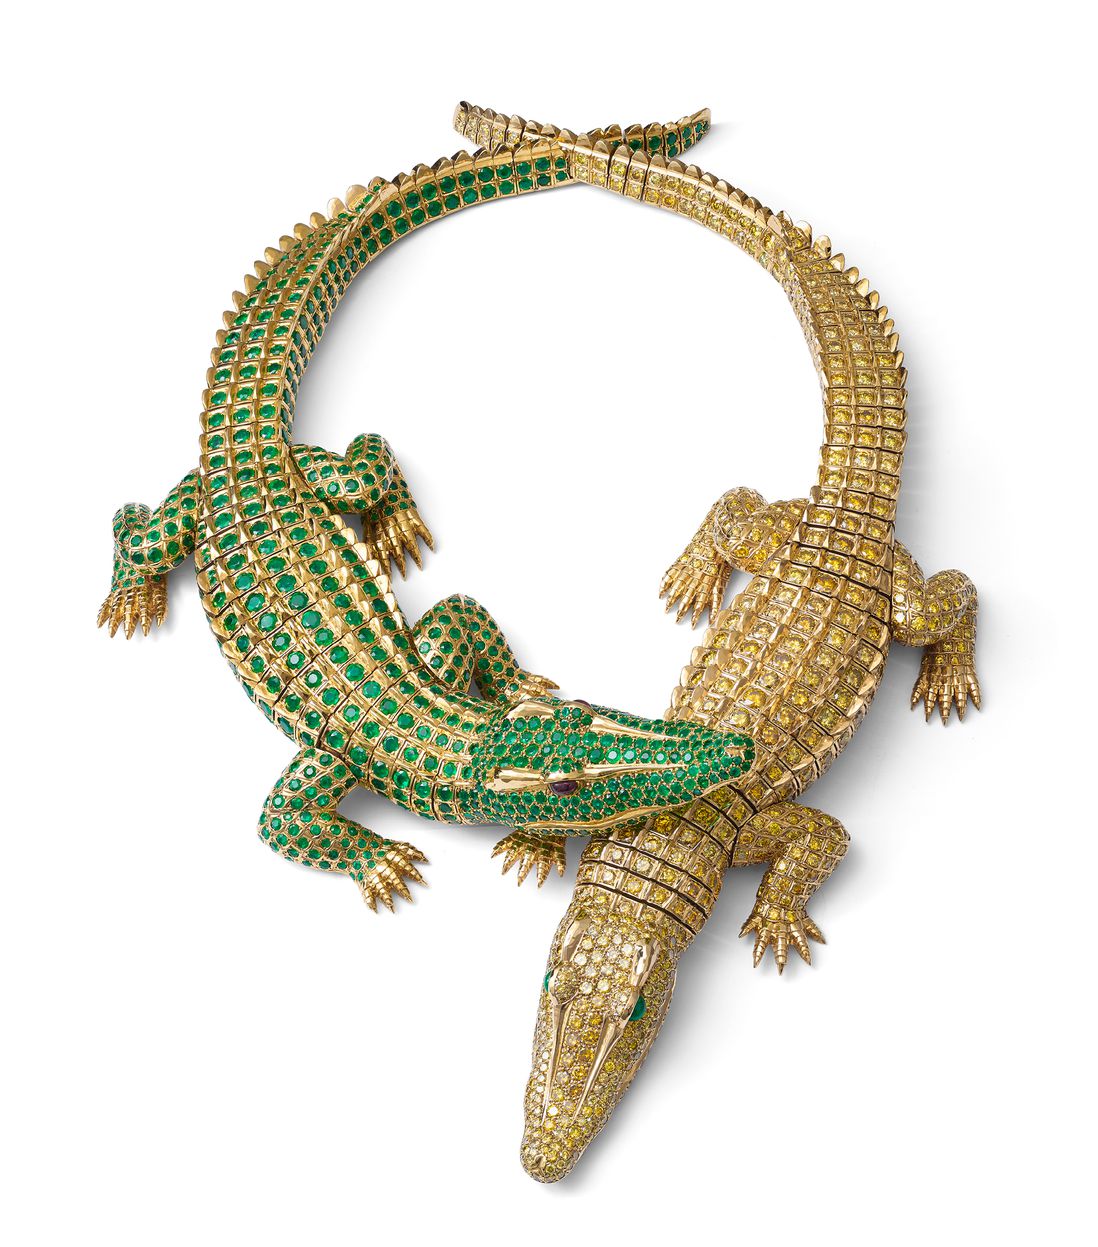 A necklace of two crocodiles, bedecked with jewels, one green and one golden, with the green crocoidile's head on the gold one's